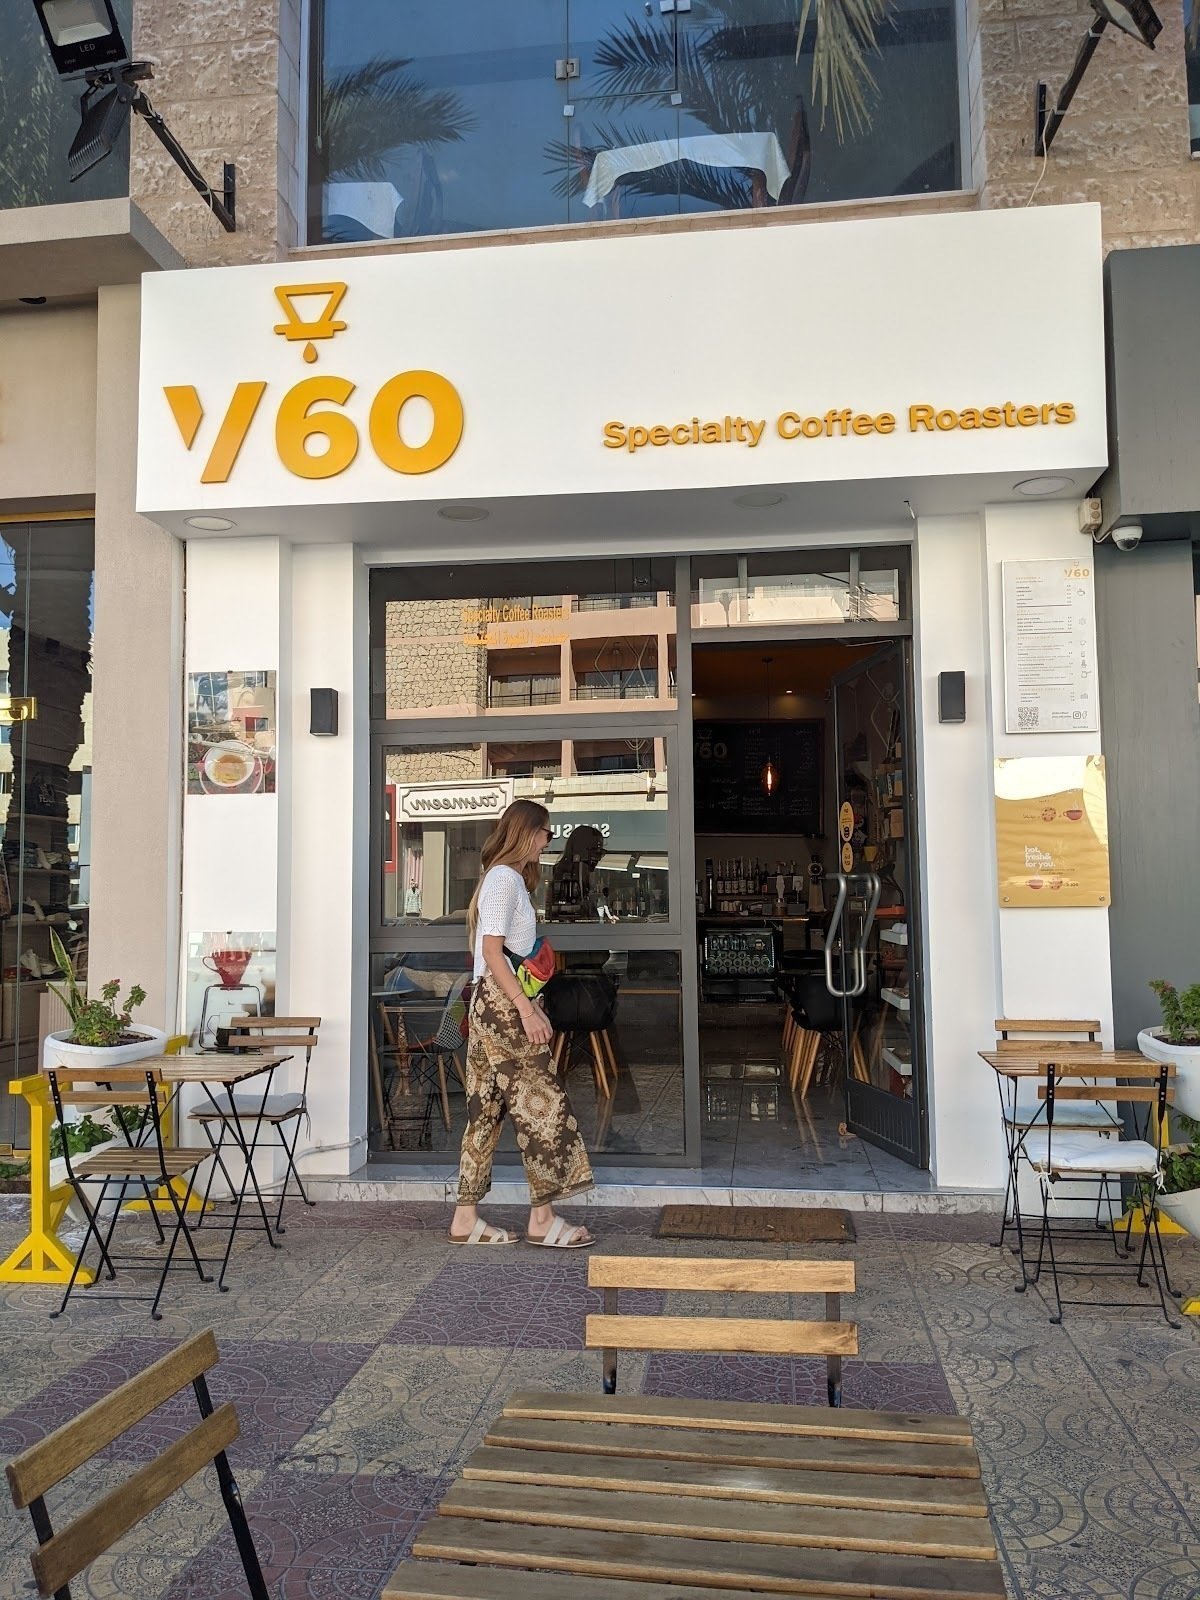 <span class="translation_missing" title="translation missing: en.meta.location_title, location_name: V60 Specialty Coffee Roasters, city: Aqaba">Location Title</span>